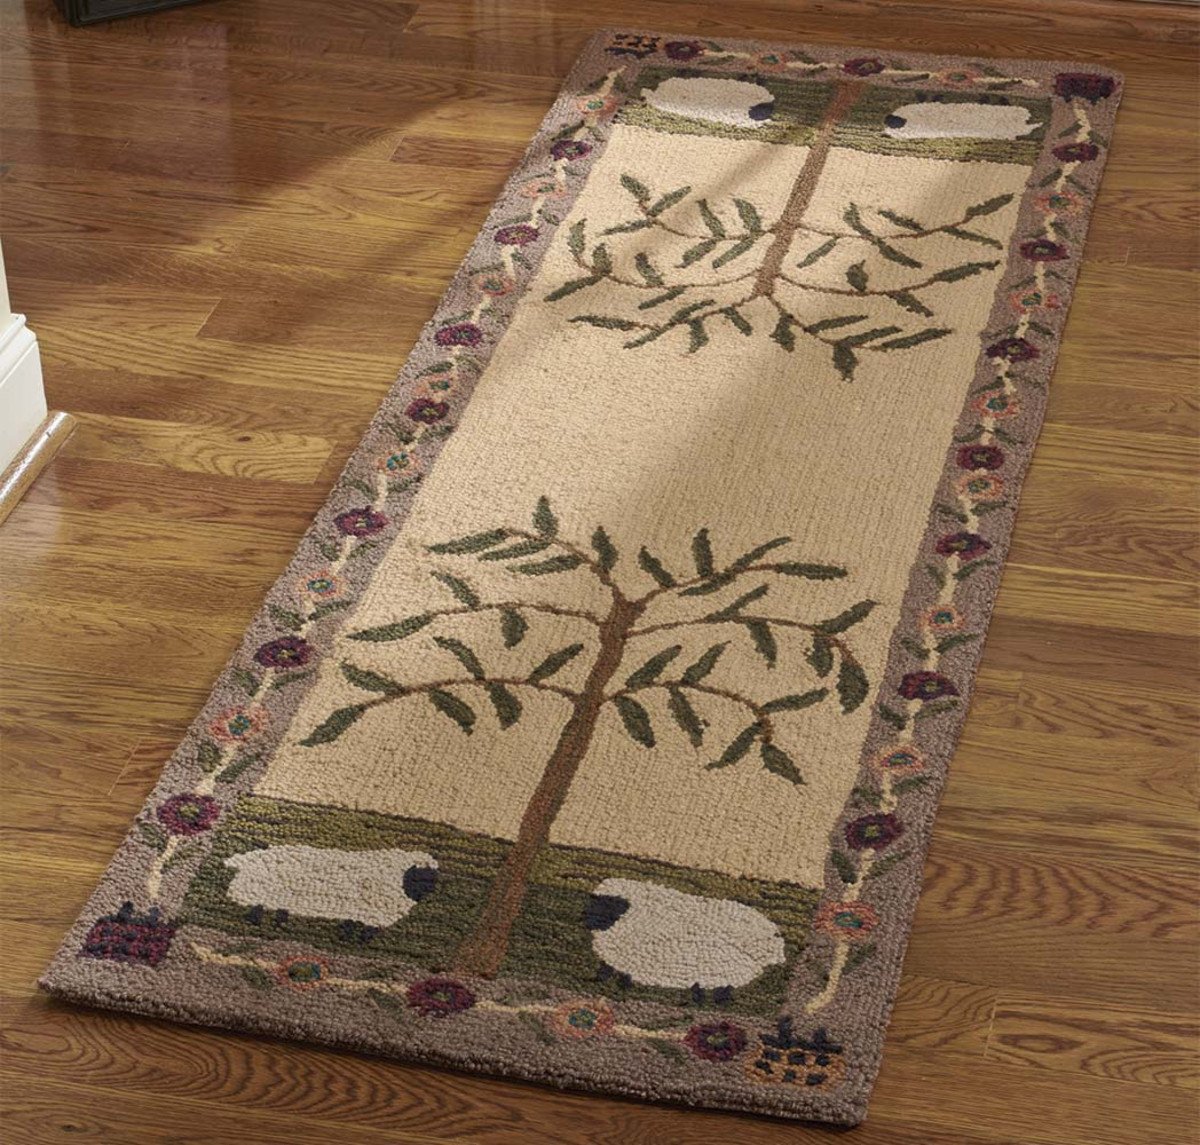 Park Designs Willow & Sheep Hooked Rug Runner 24 x 72 Inches - Olde Church Emporium